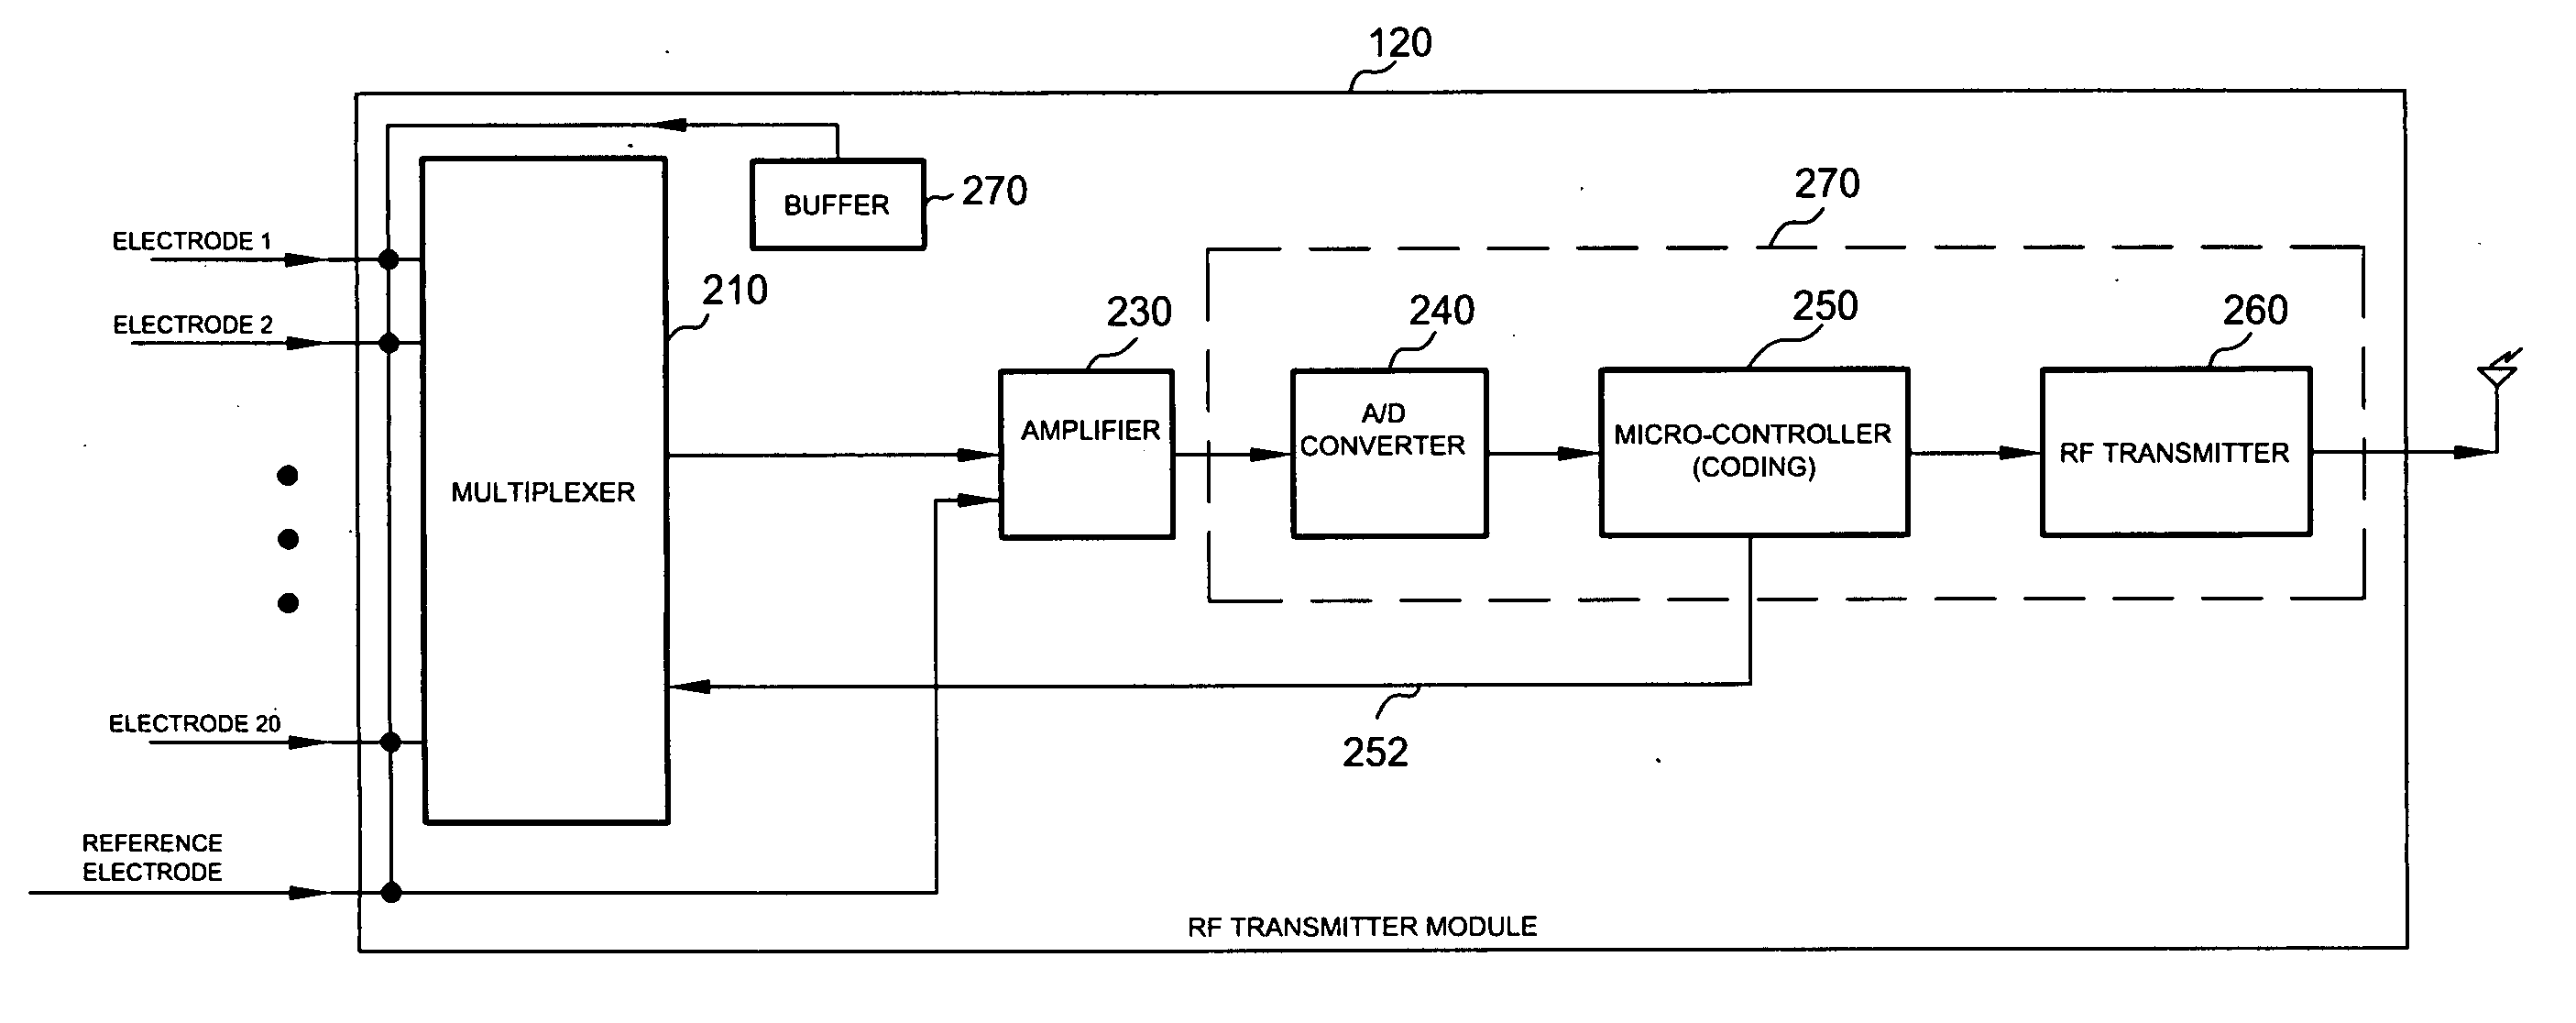 Catheter radio frequency adapter for wireless communication